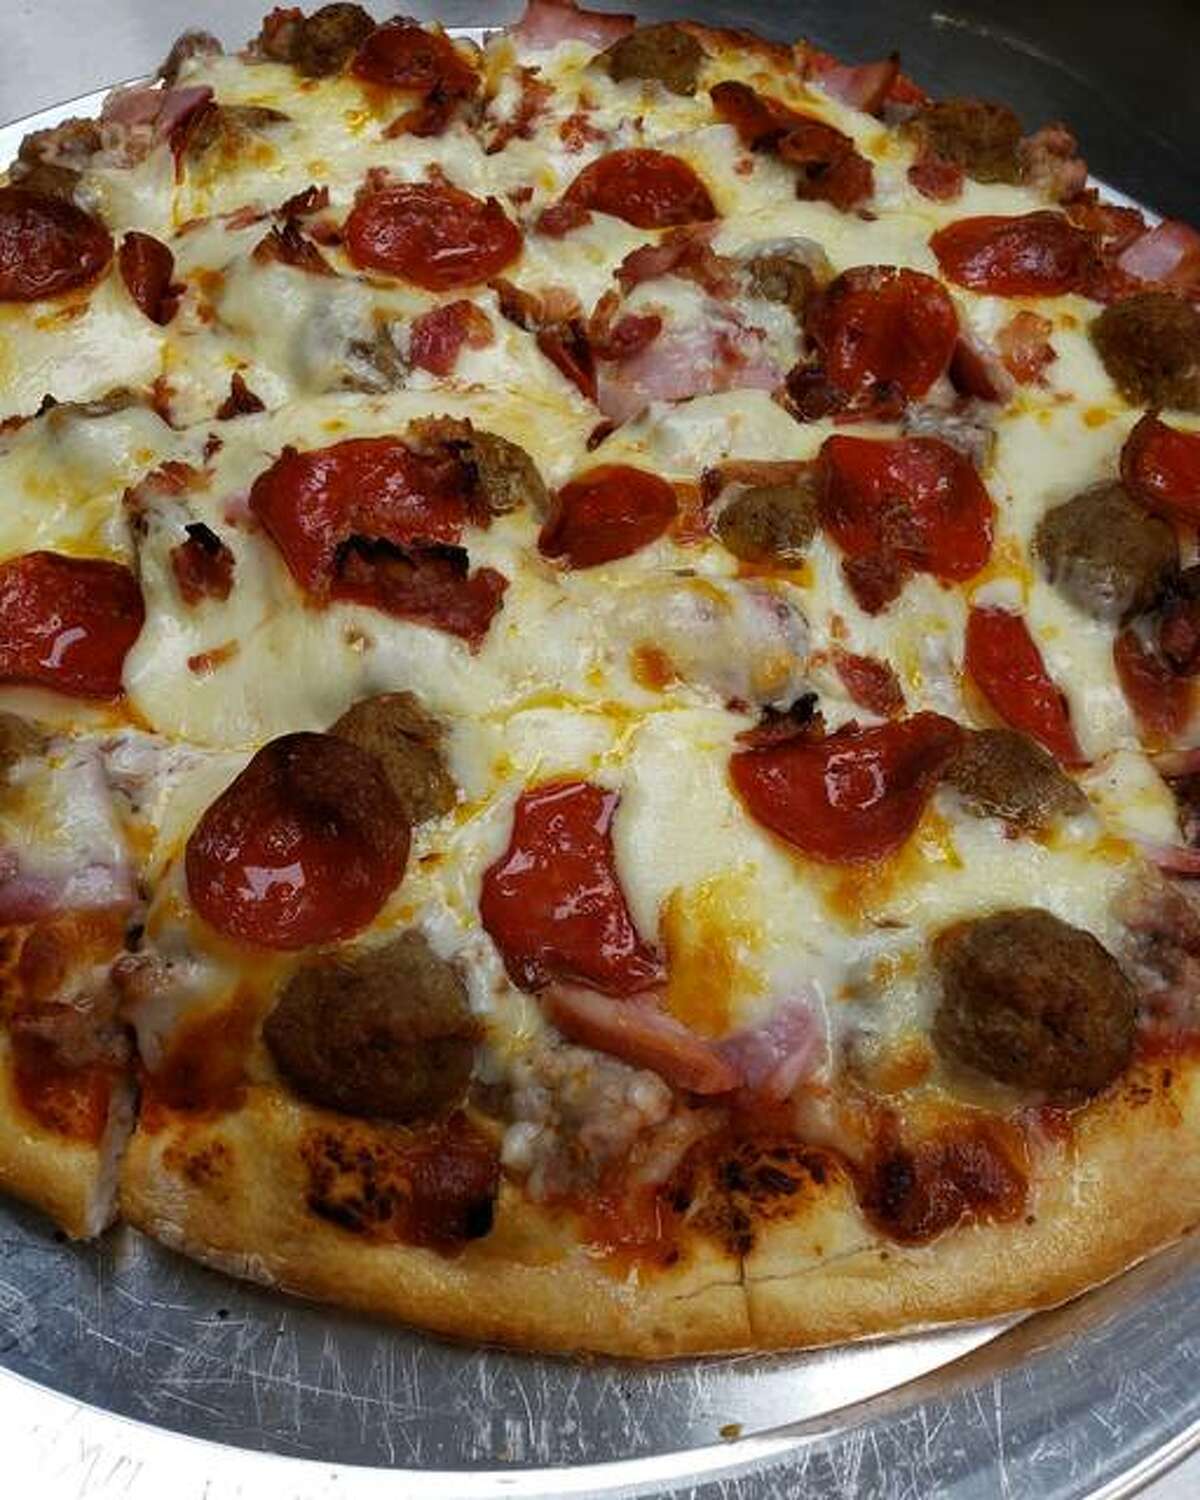 Great Riverbend pizzas, like the Carnivore served at the 1880 Pizza Pasta House in Jerseyville, will be showcased Sept. 13-17 during the premier Epic Pizza Week.